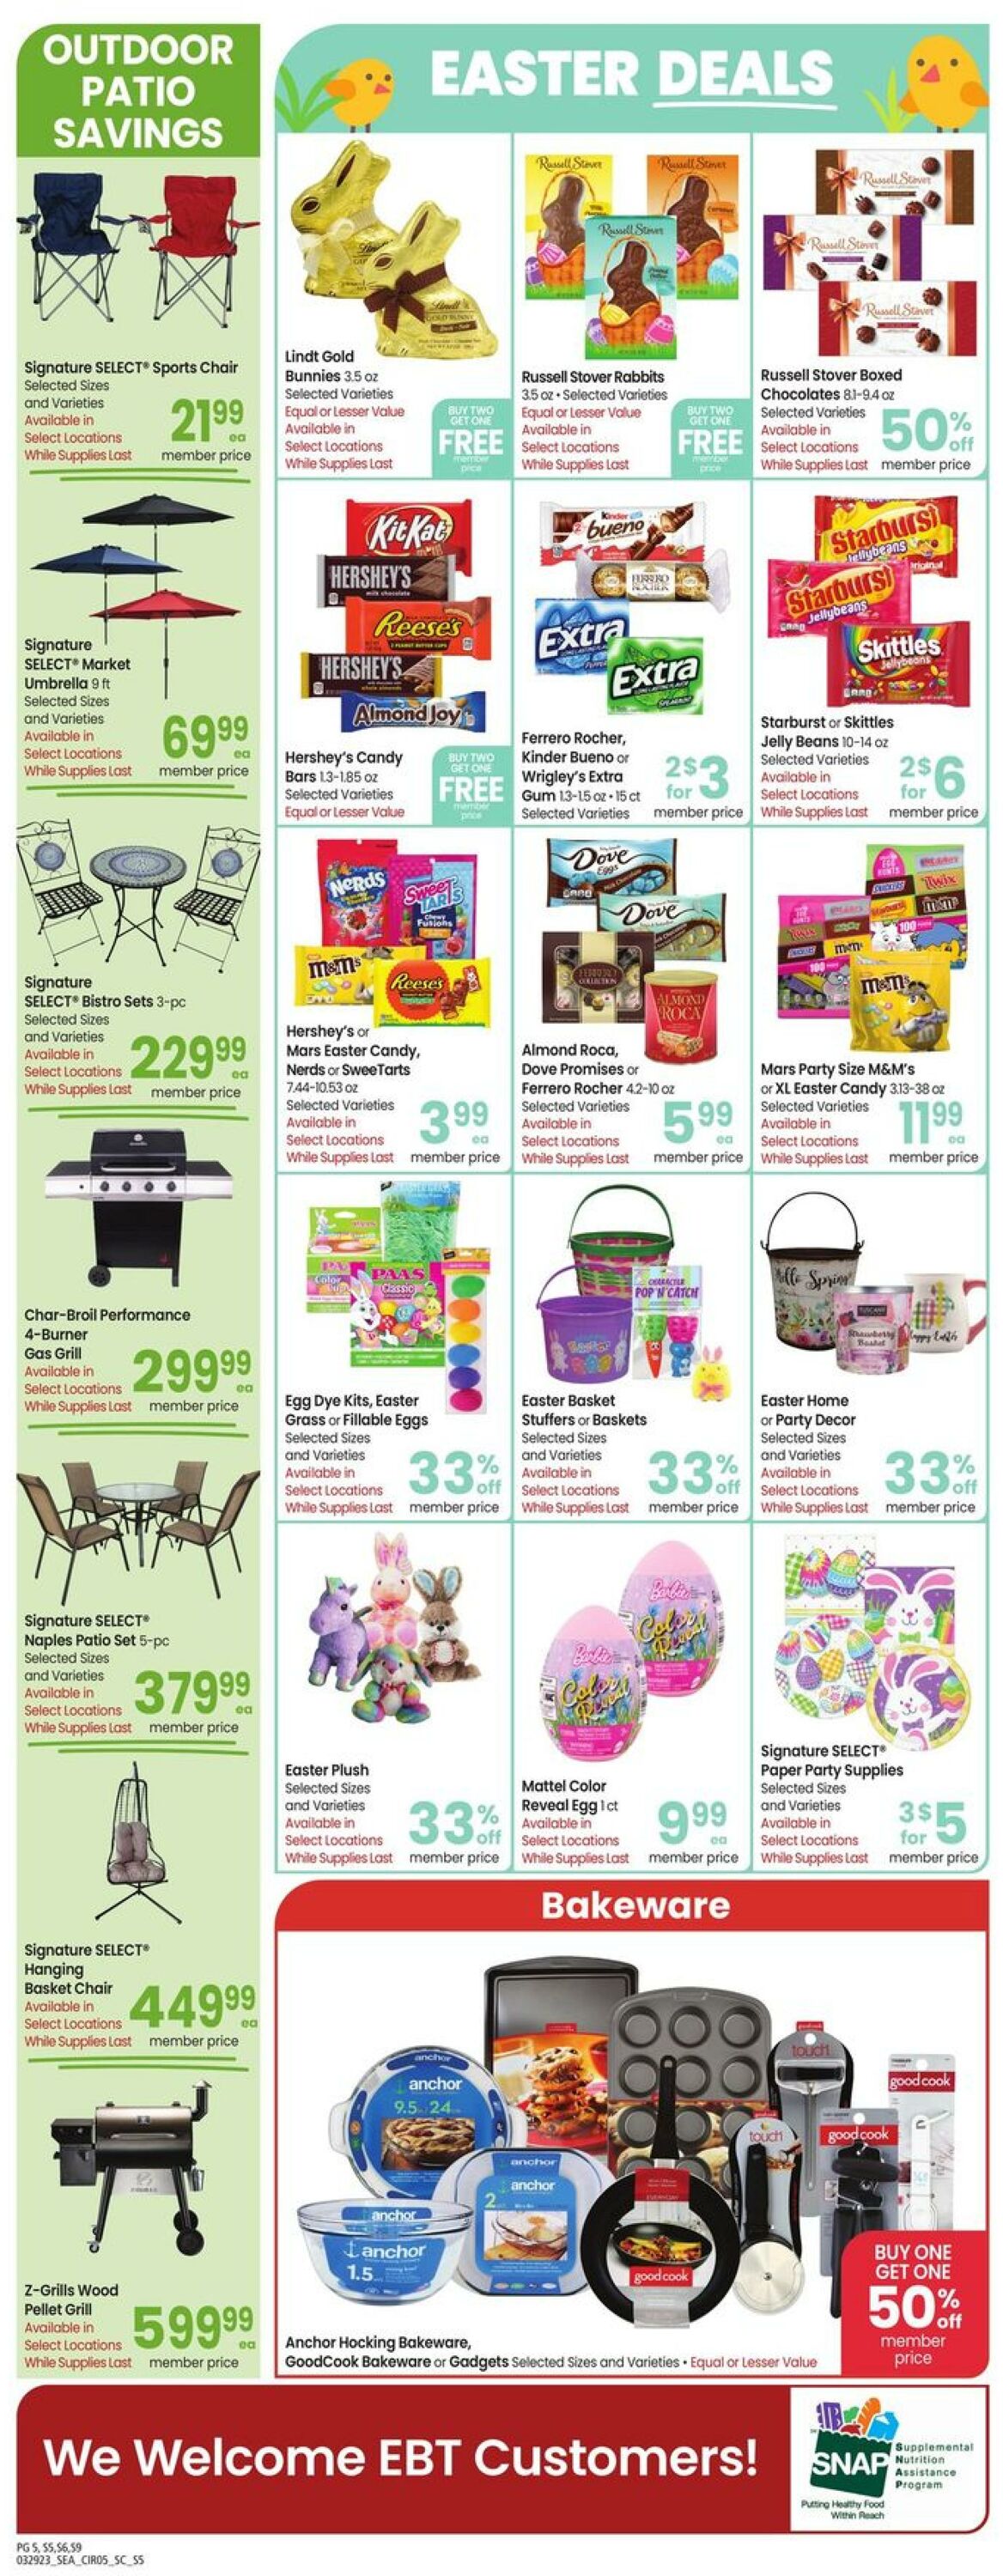 Weekly ad Carrs 03/29/2023 - 04/04/2023